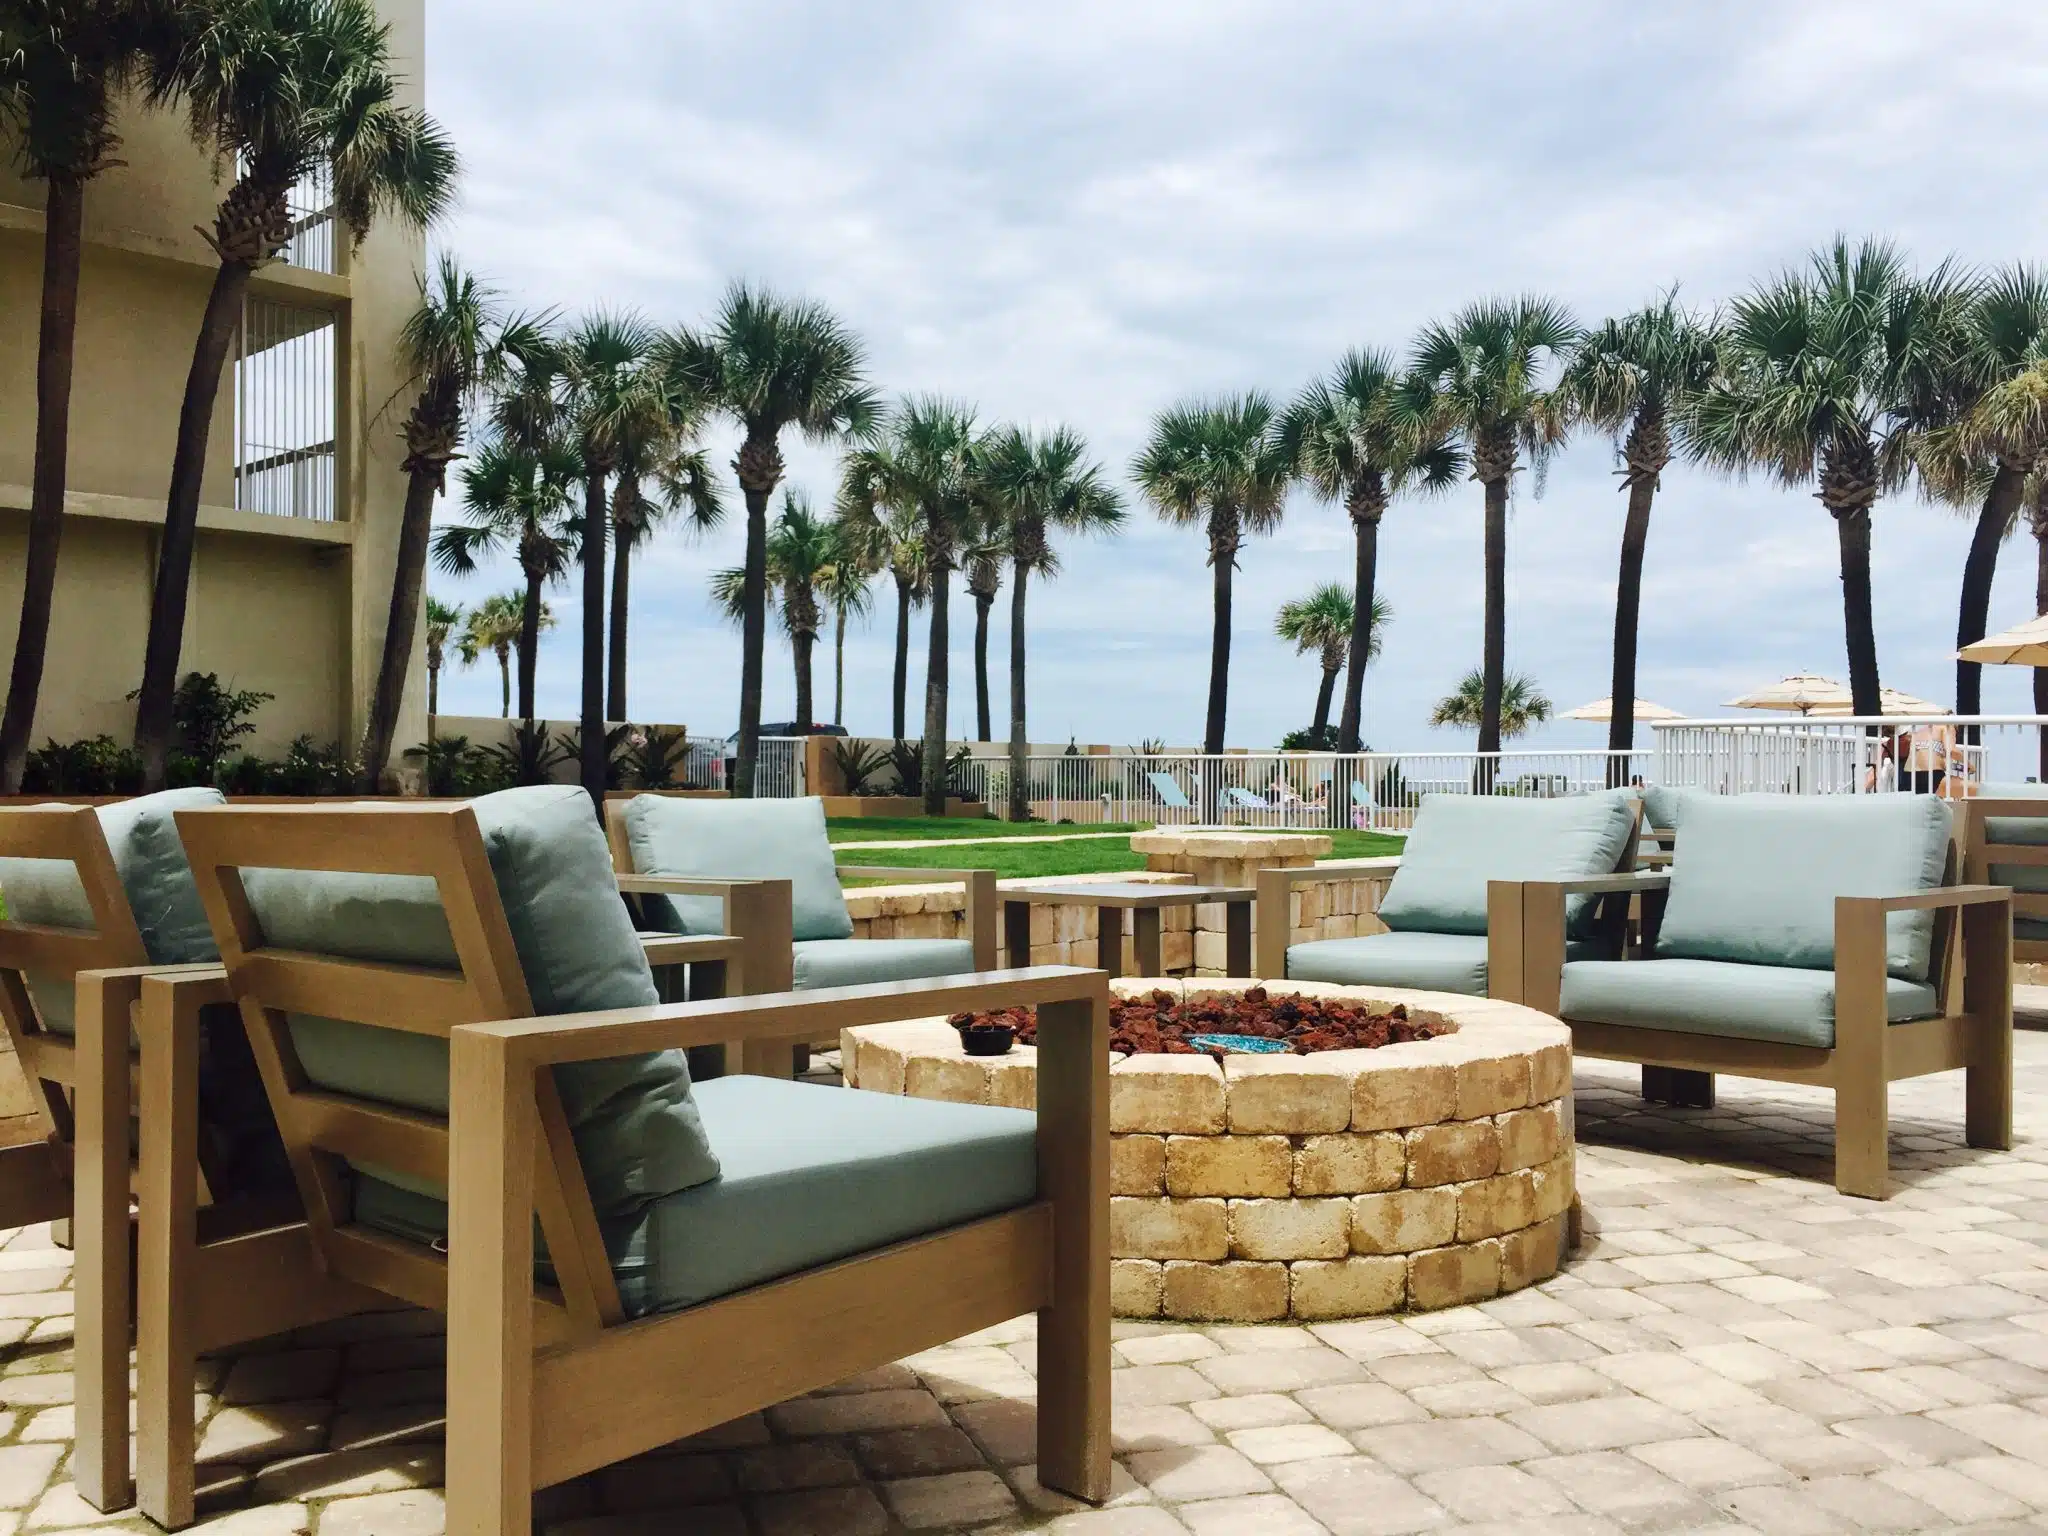 Pull Up a Spot Right on the Beach at the Holiday Inn Hotel & Suites Daytona Beach!